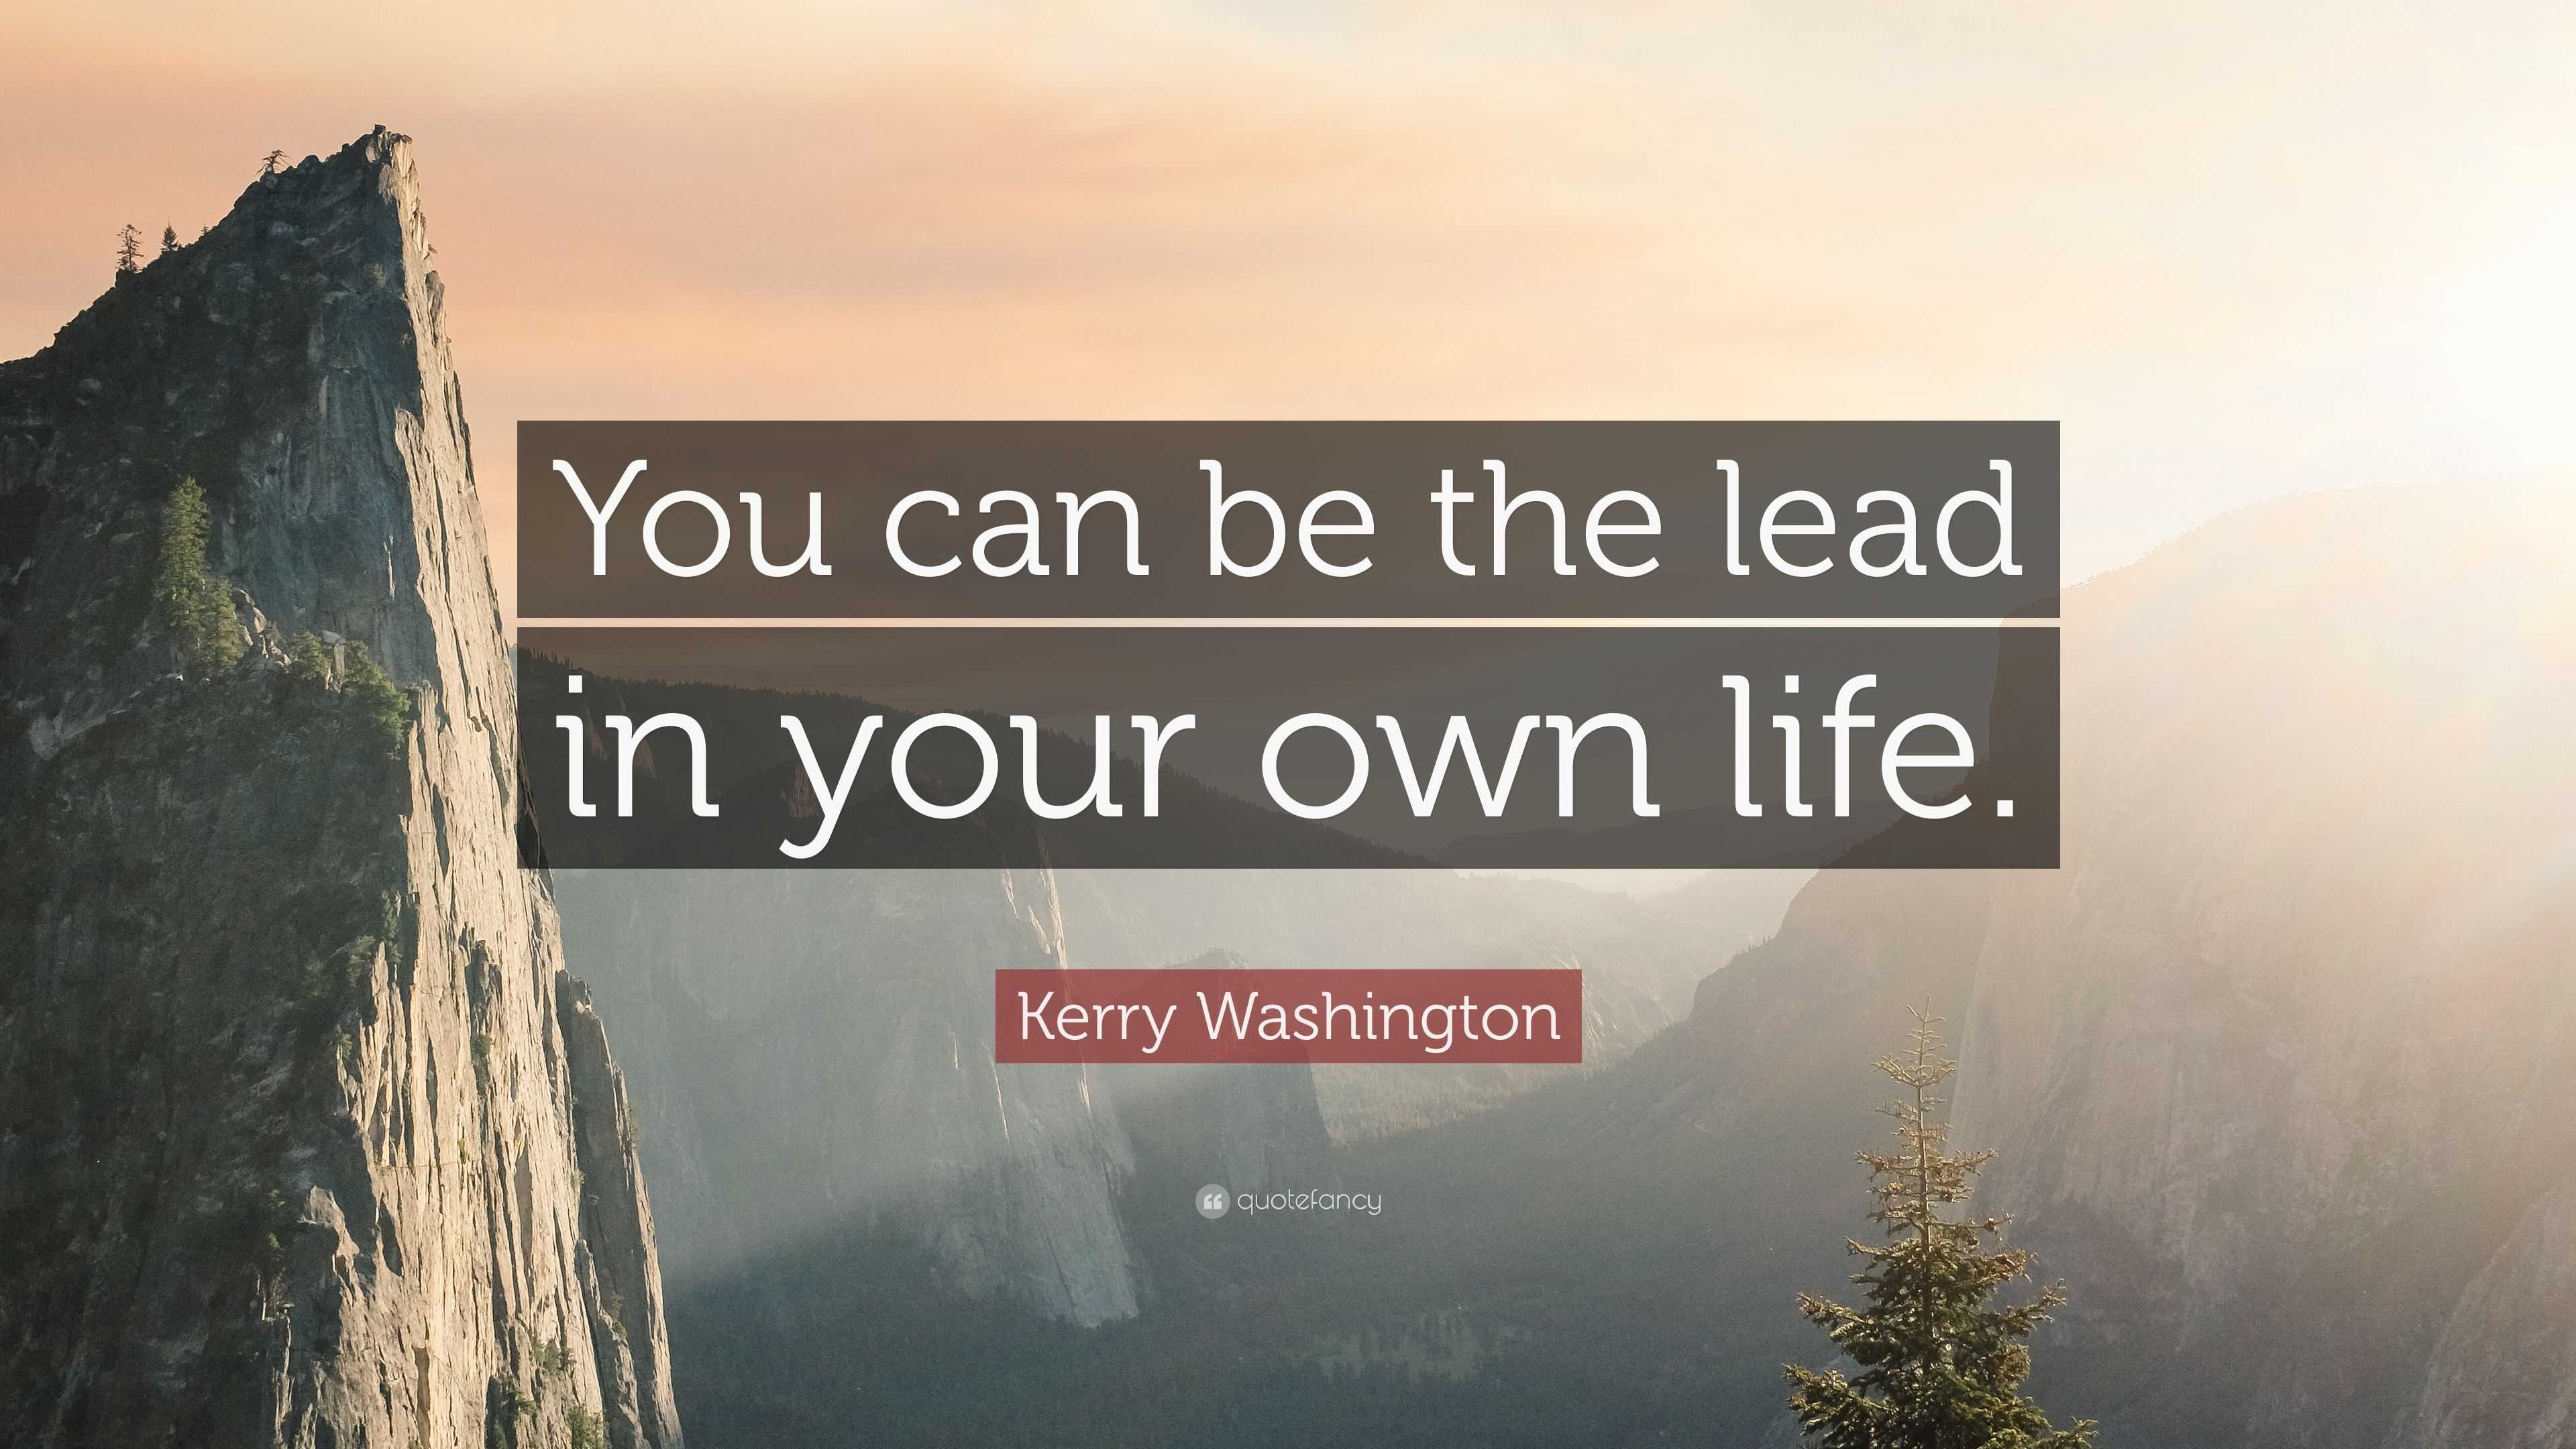 Kerry Washington Quote: “You can be the lead in your own life.”